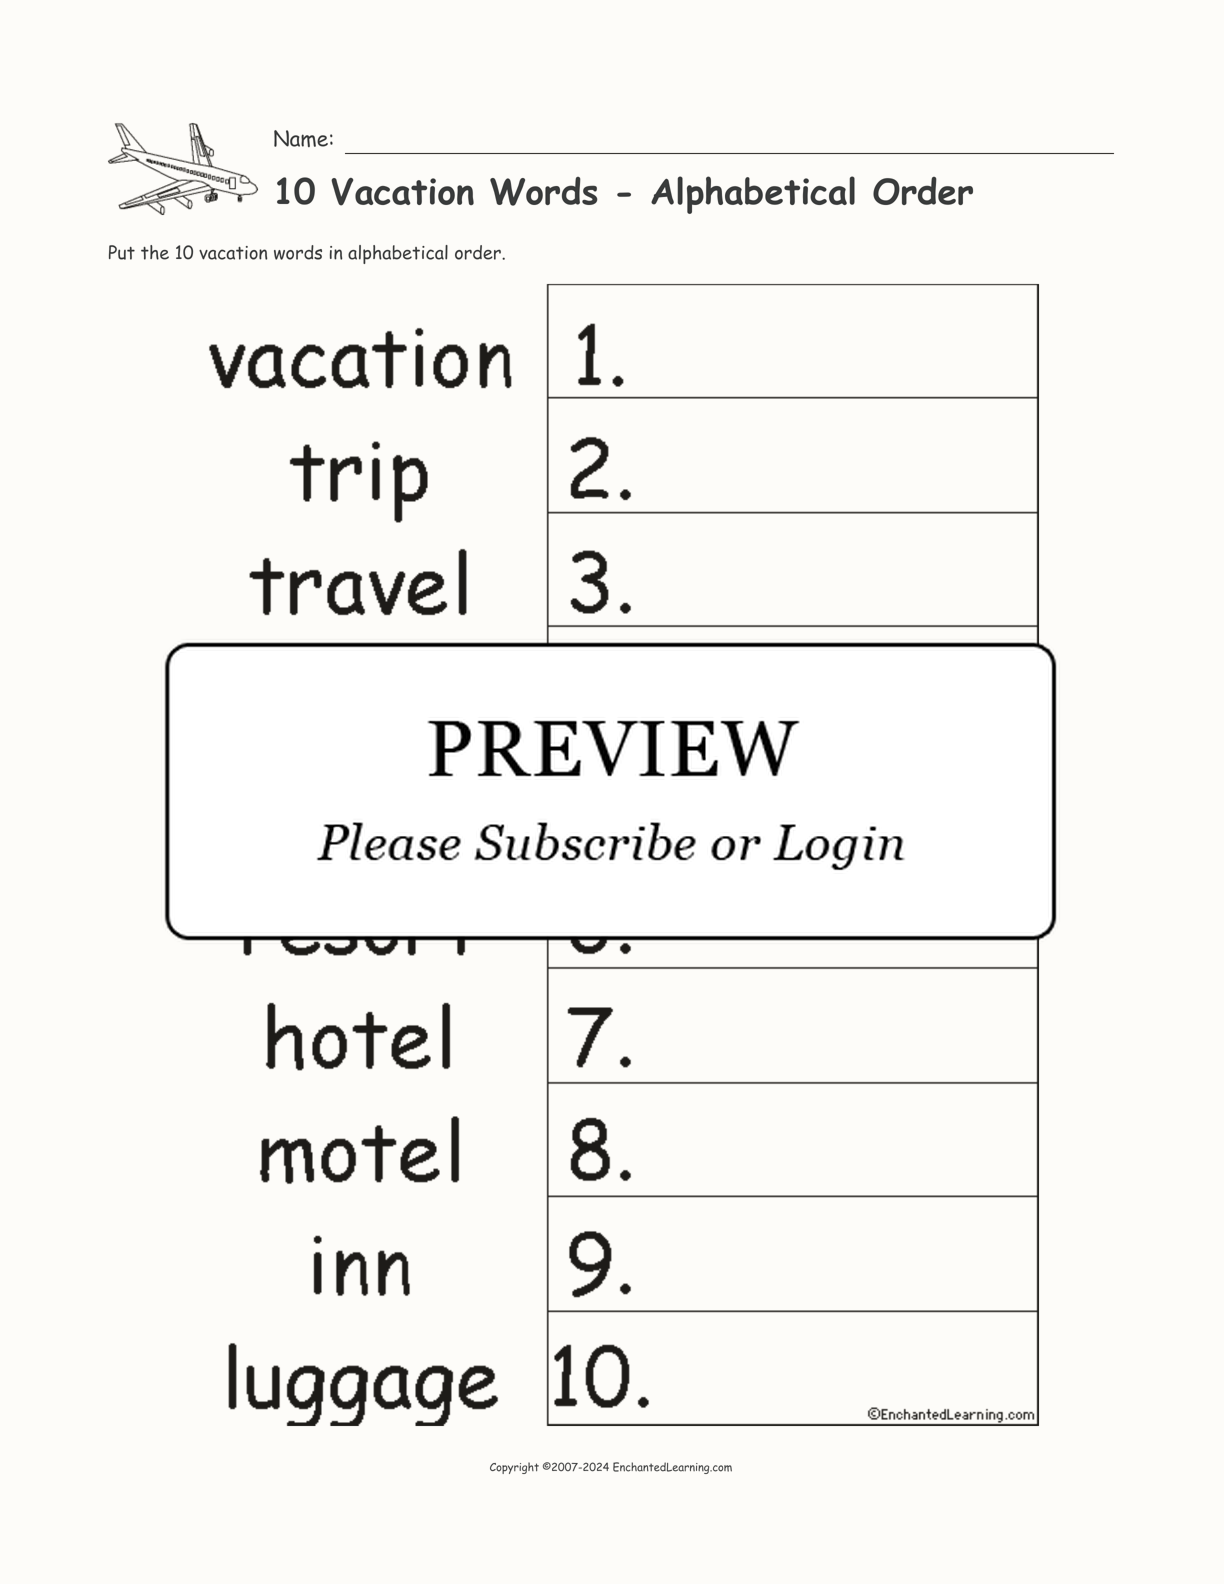 10 Vacation Words - Alphabetical Order interactive worksheet page 1